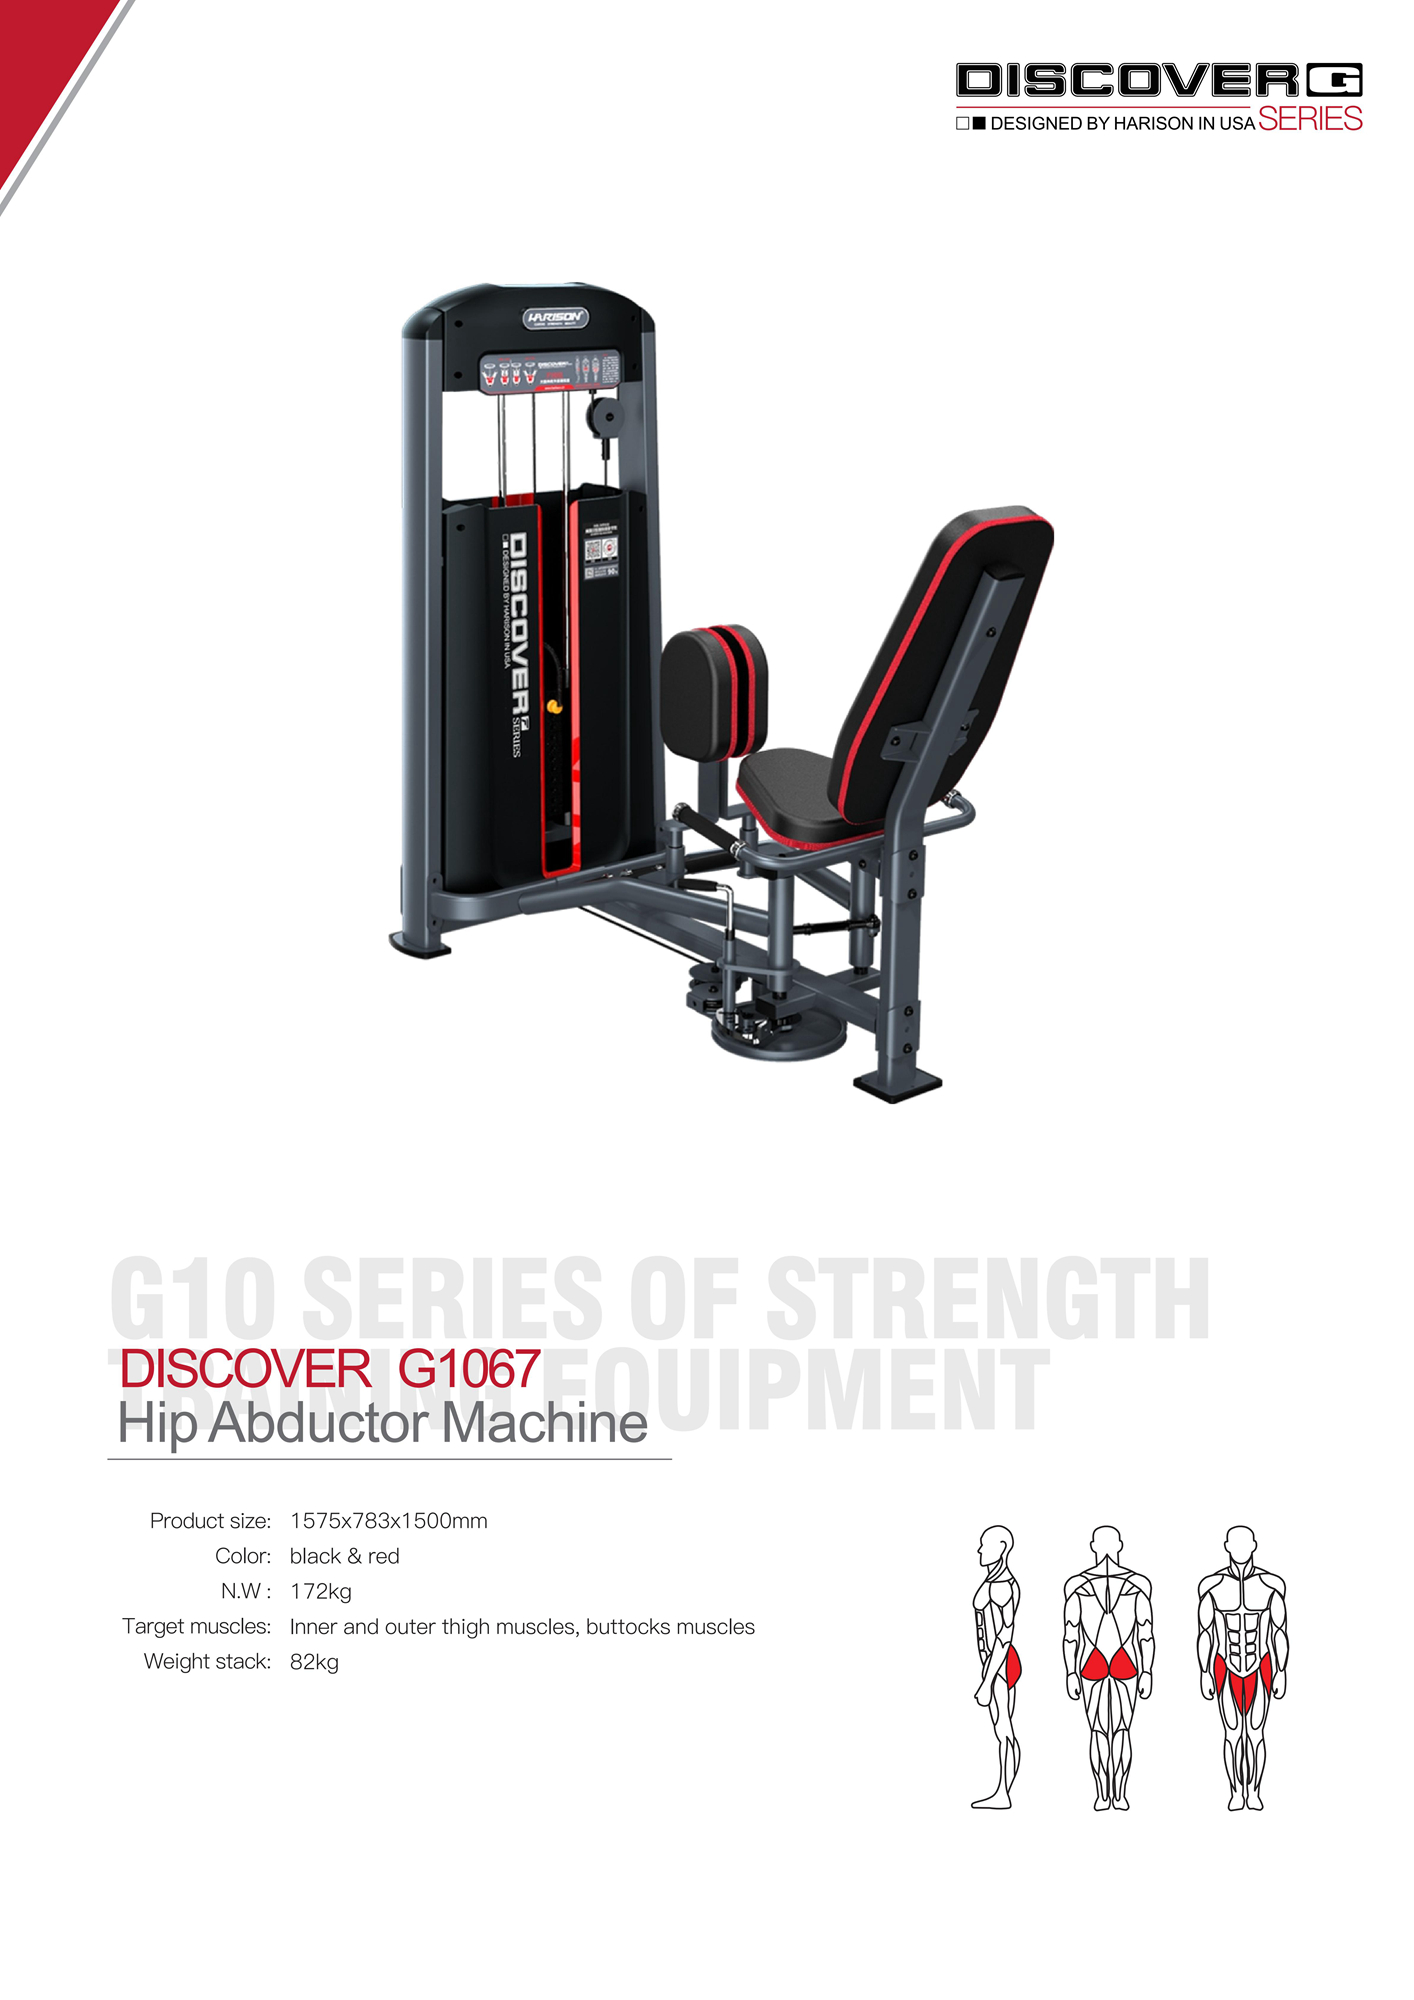 DISCOVER G1067 Hip Abductor Machine